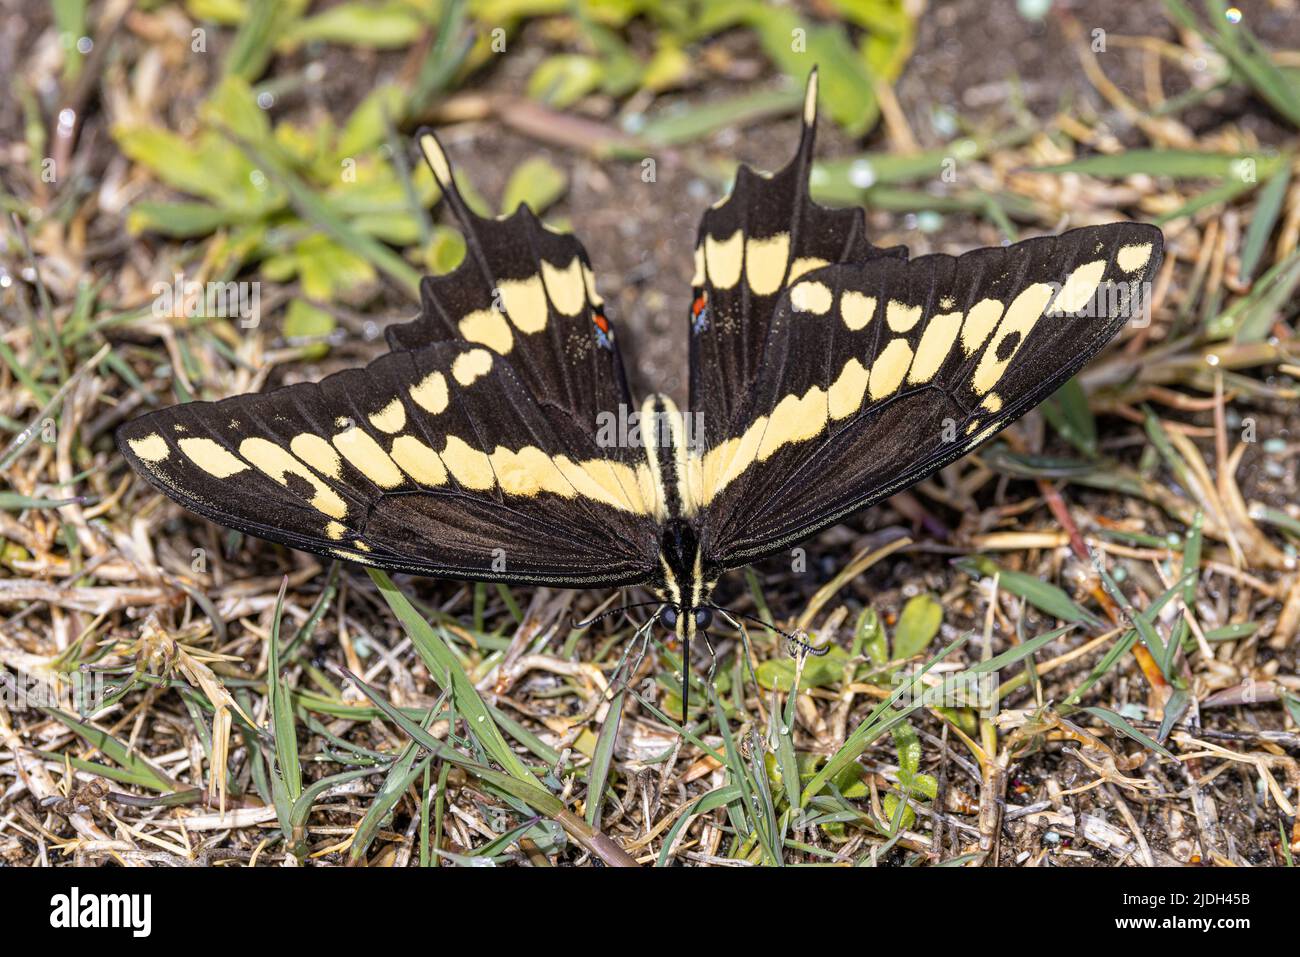 giant swallowtail (Papilio cresphontes), drinks dewdrops from the grass, USA, Arizona, Sonoran Stock Photo